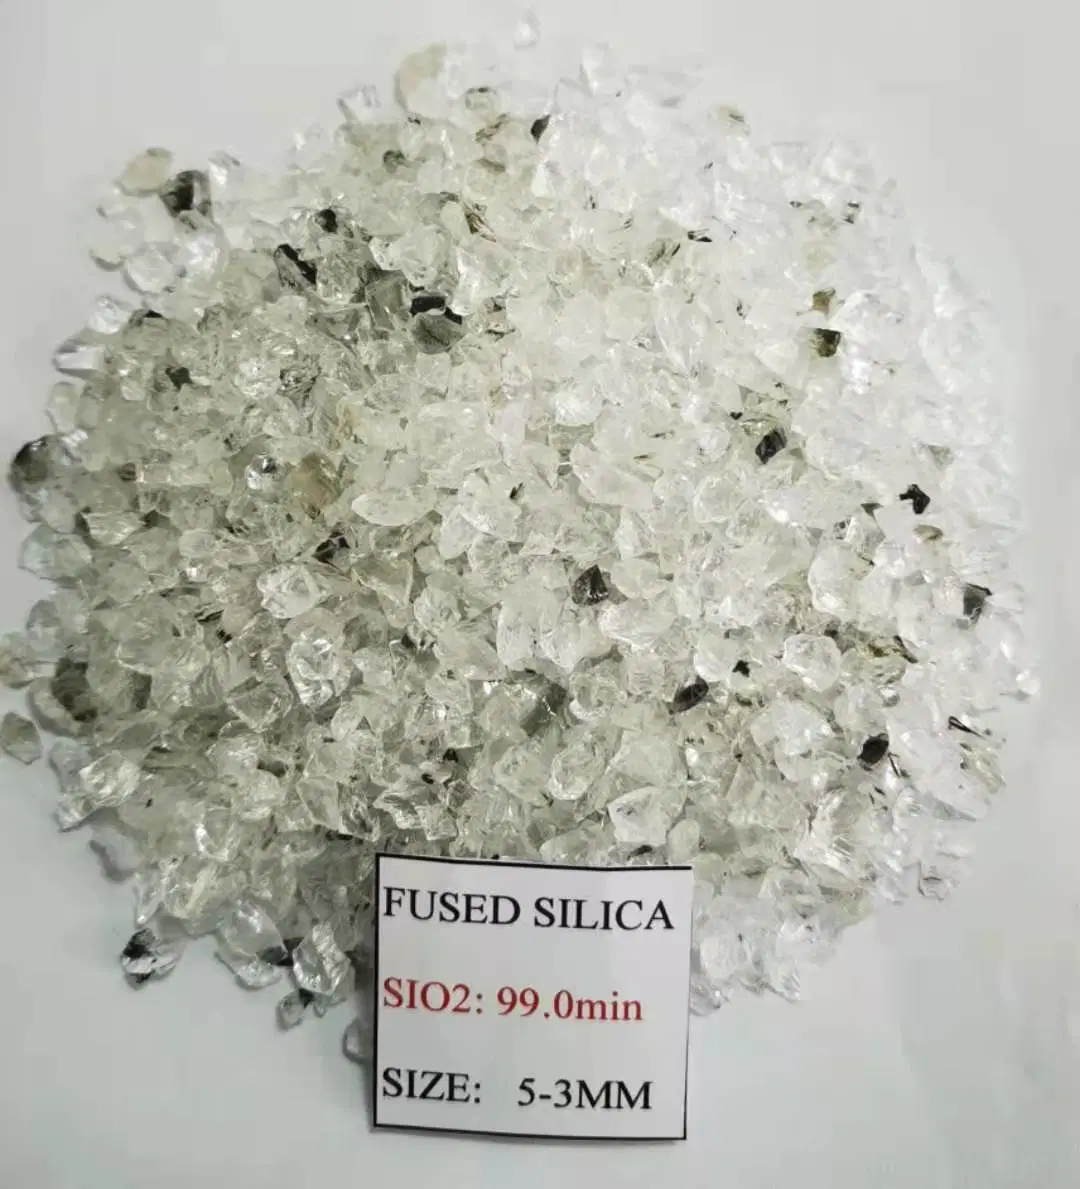 High Purity Quartz 5-3mm Transparent Fused Silica for Refractory Materials